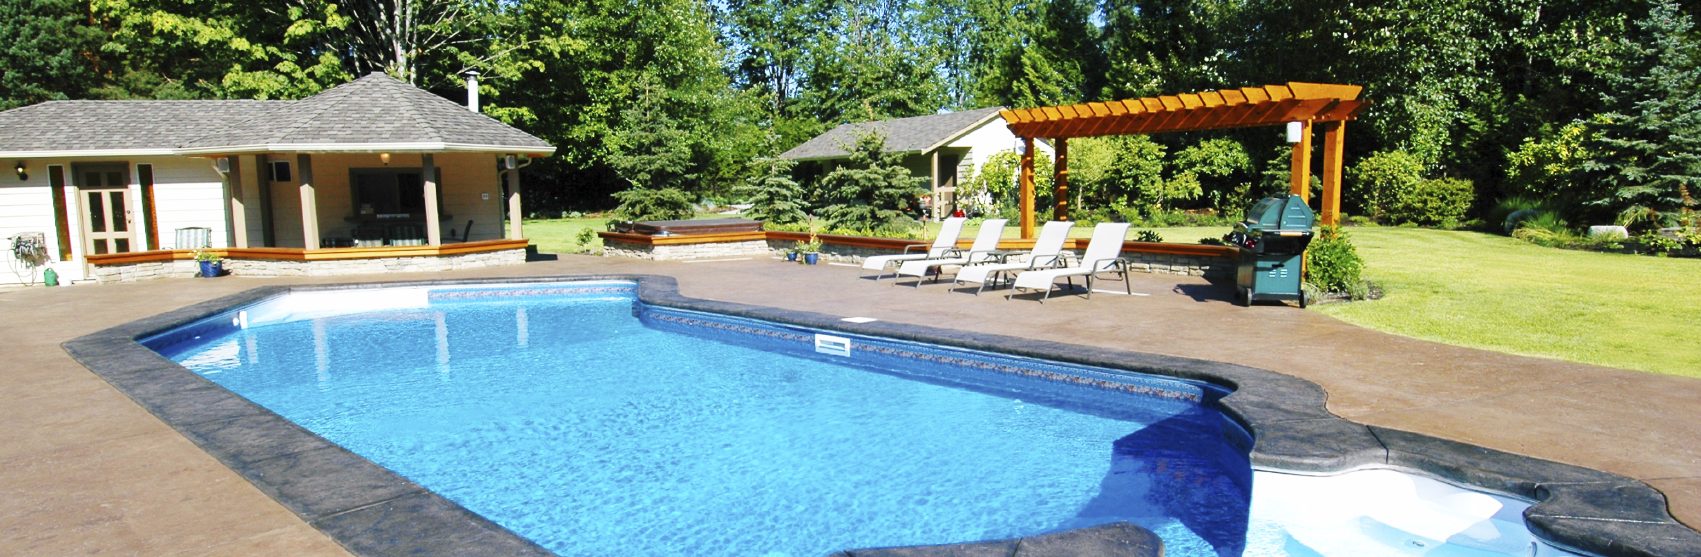 Tips to Protect Your Swimming Pool During Harsh Winters